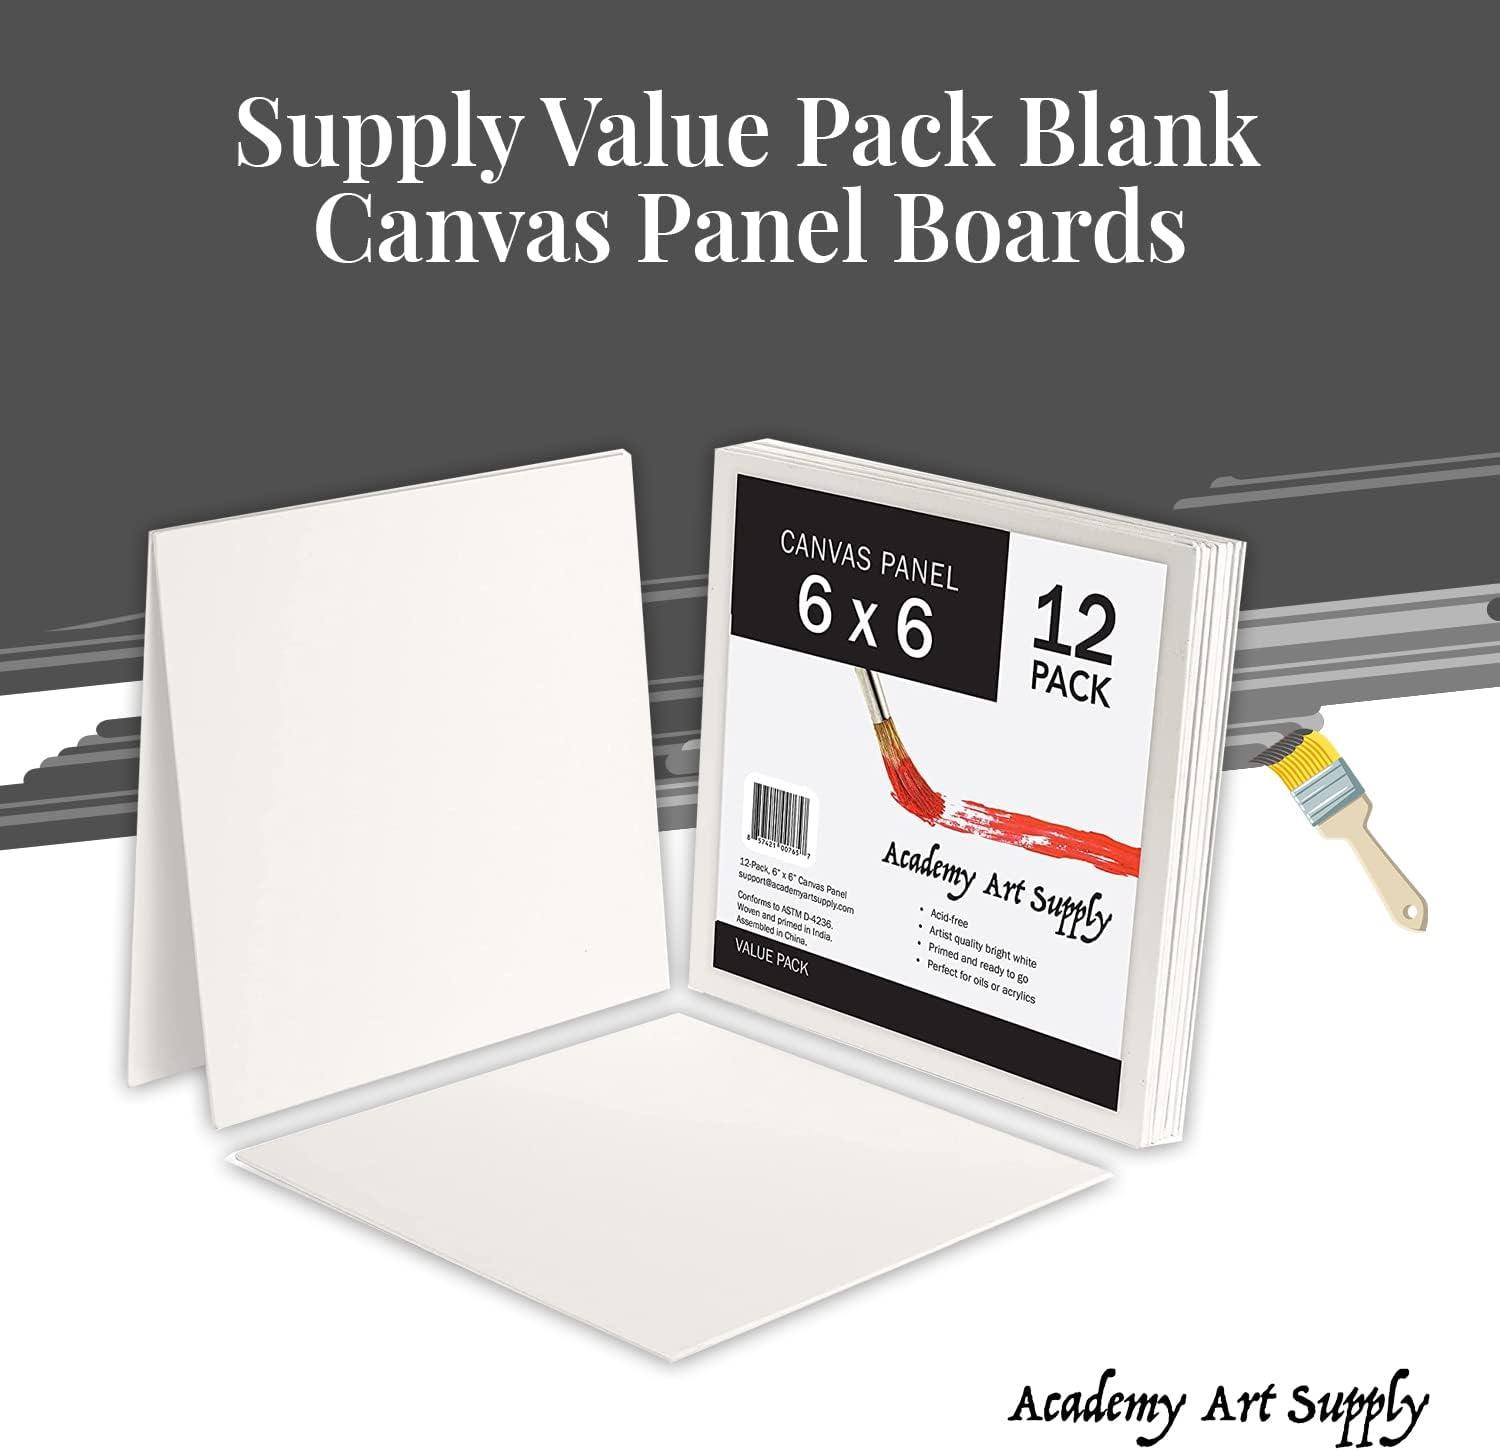  Academy Art Supply Canvases Panels 8 x 10 inch - 100